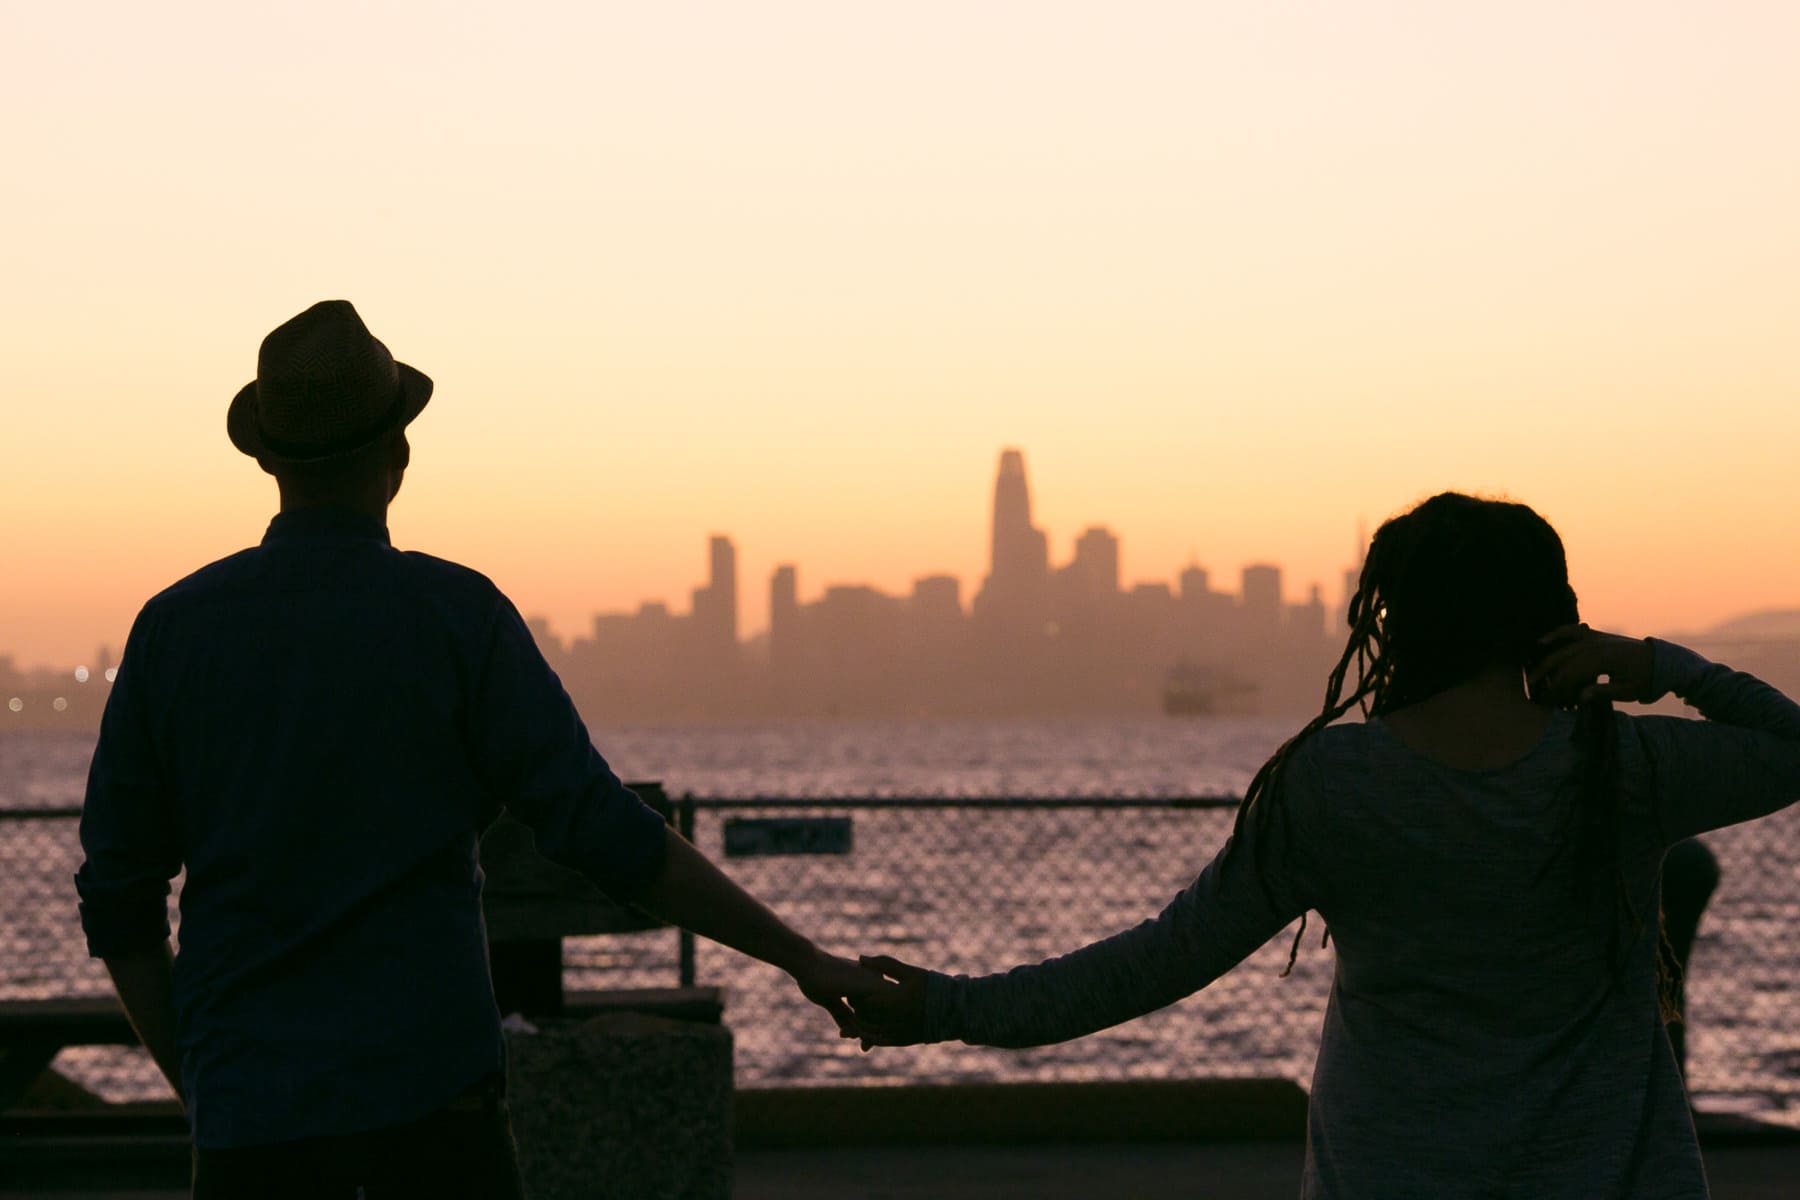 A couple silhouetted at sunset with San Francisco skyline in the background